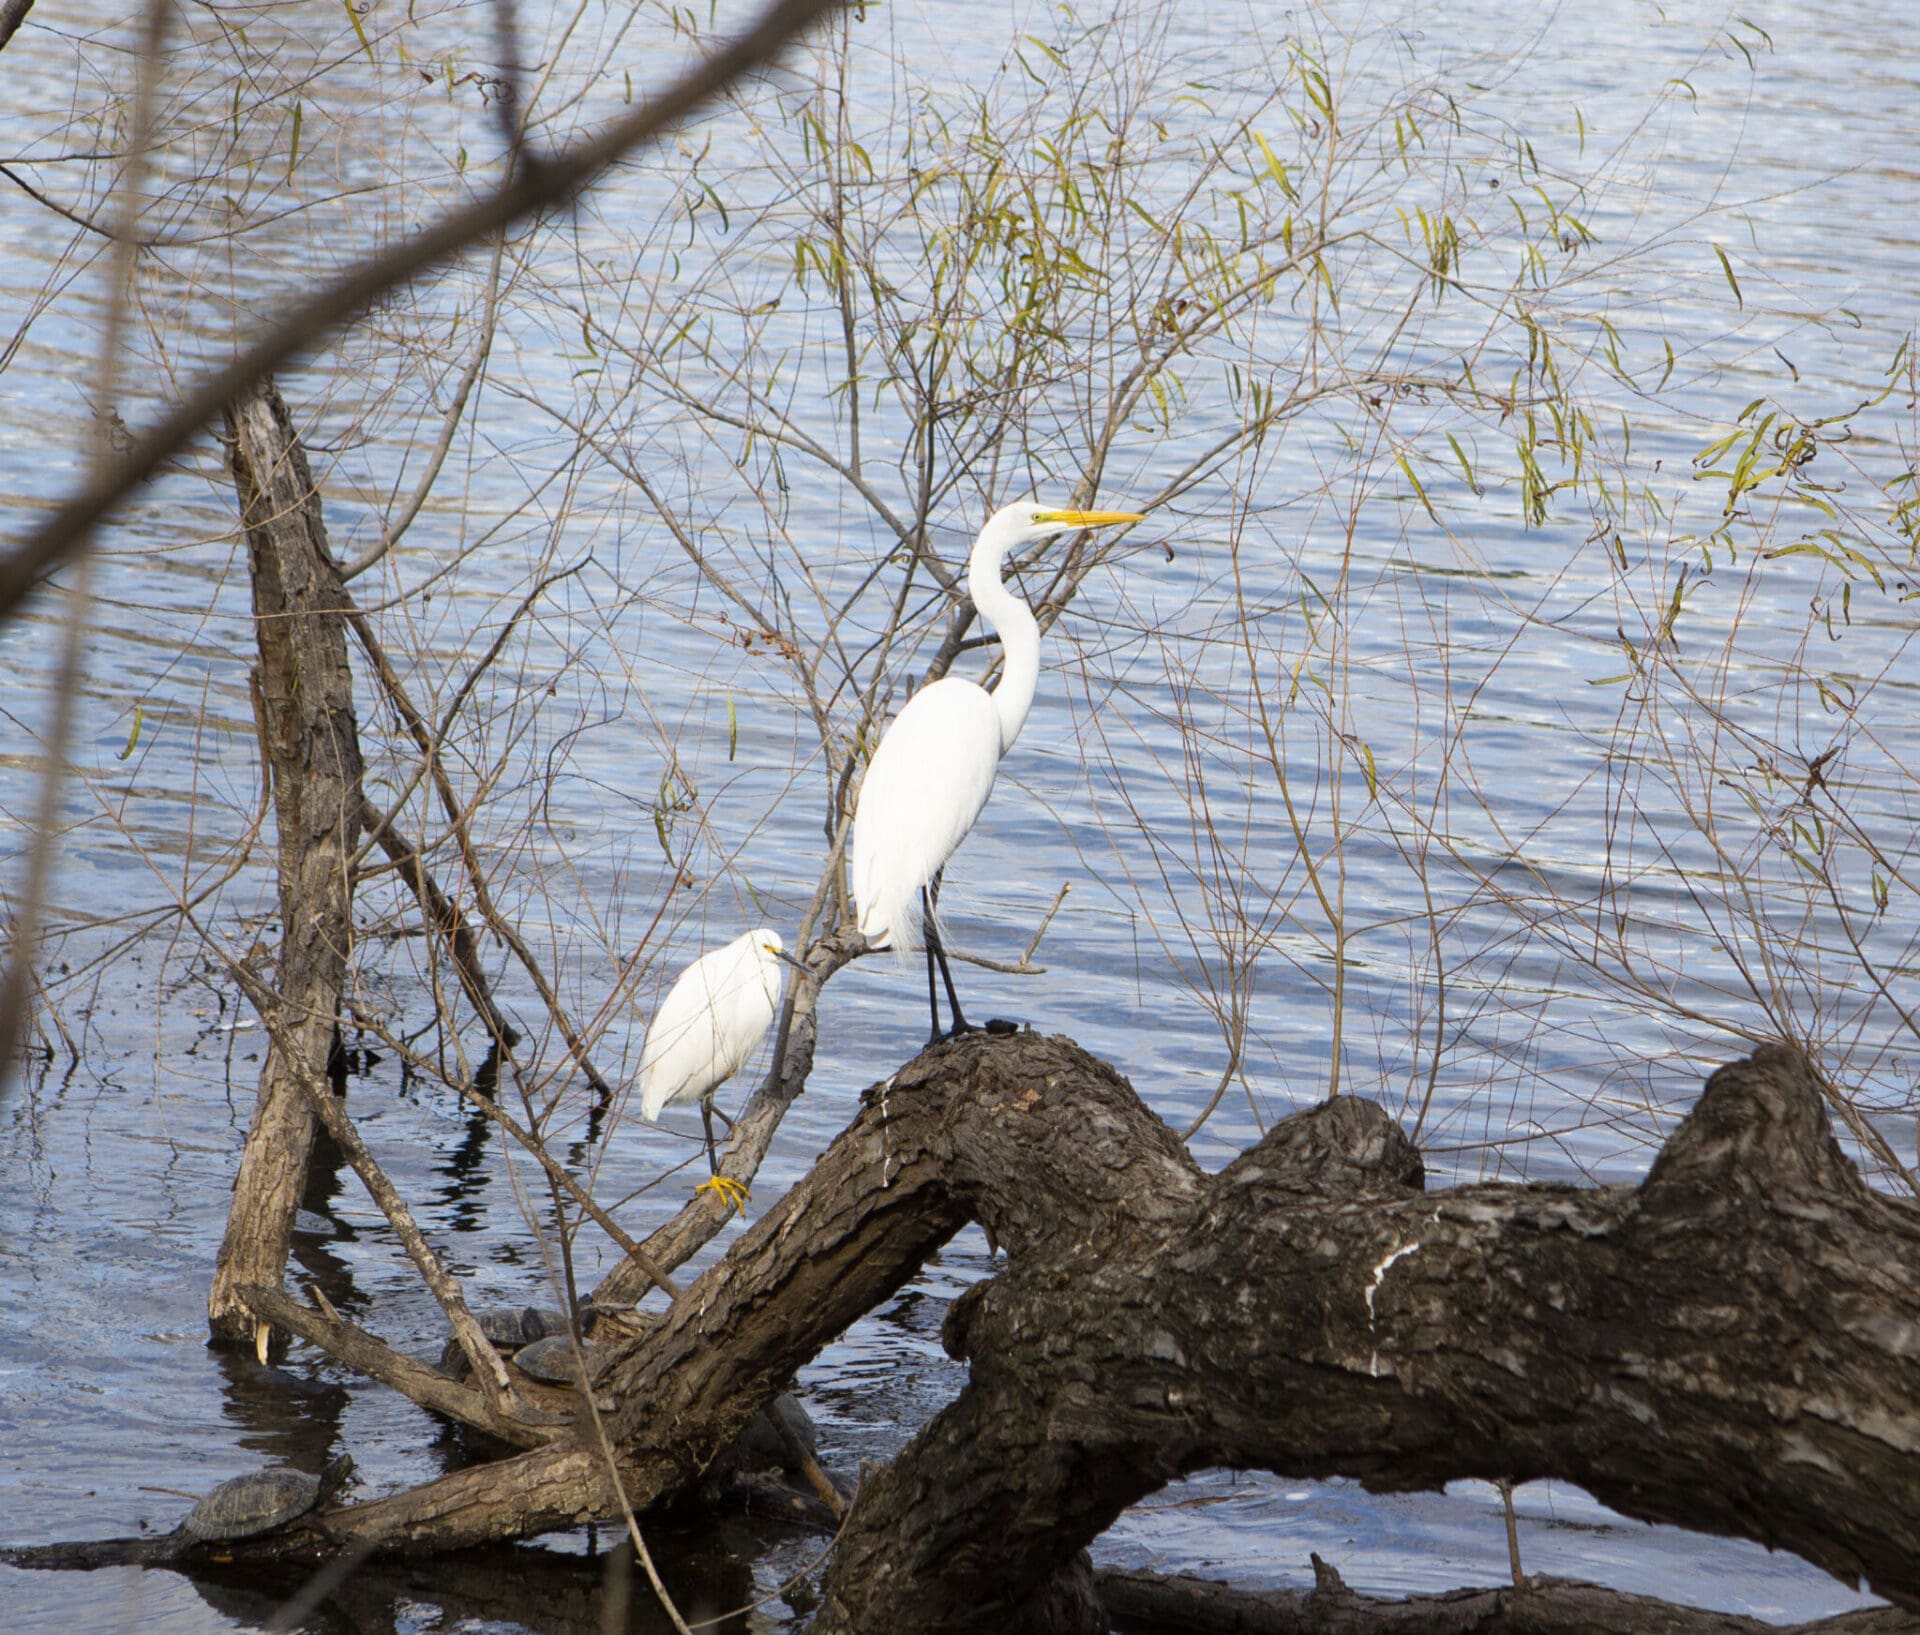 Two Great Egrets sit on a log in the water